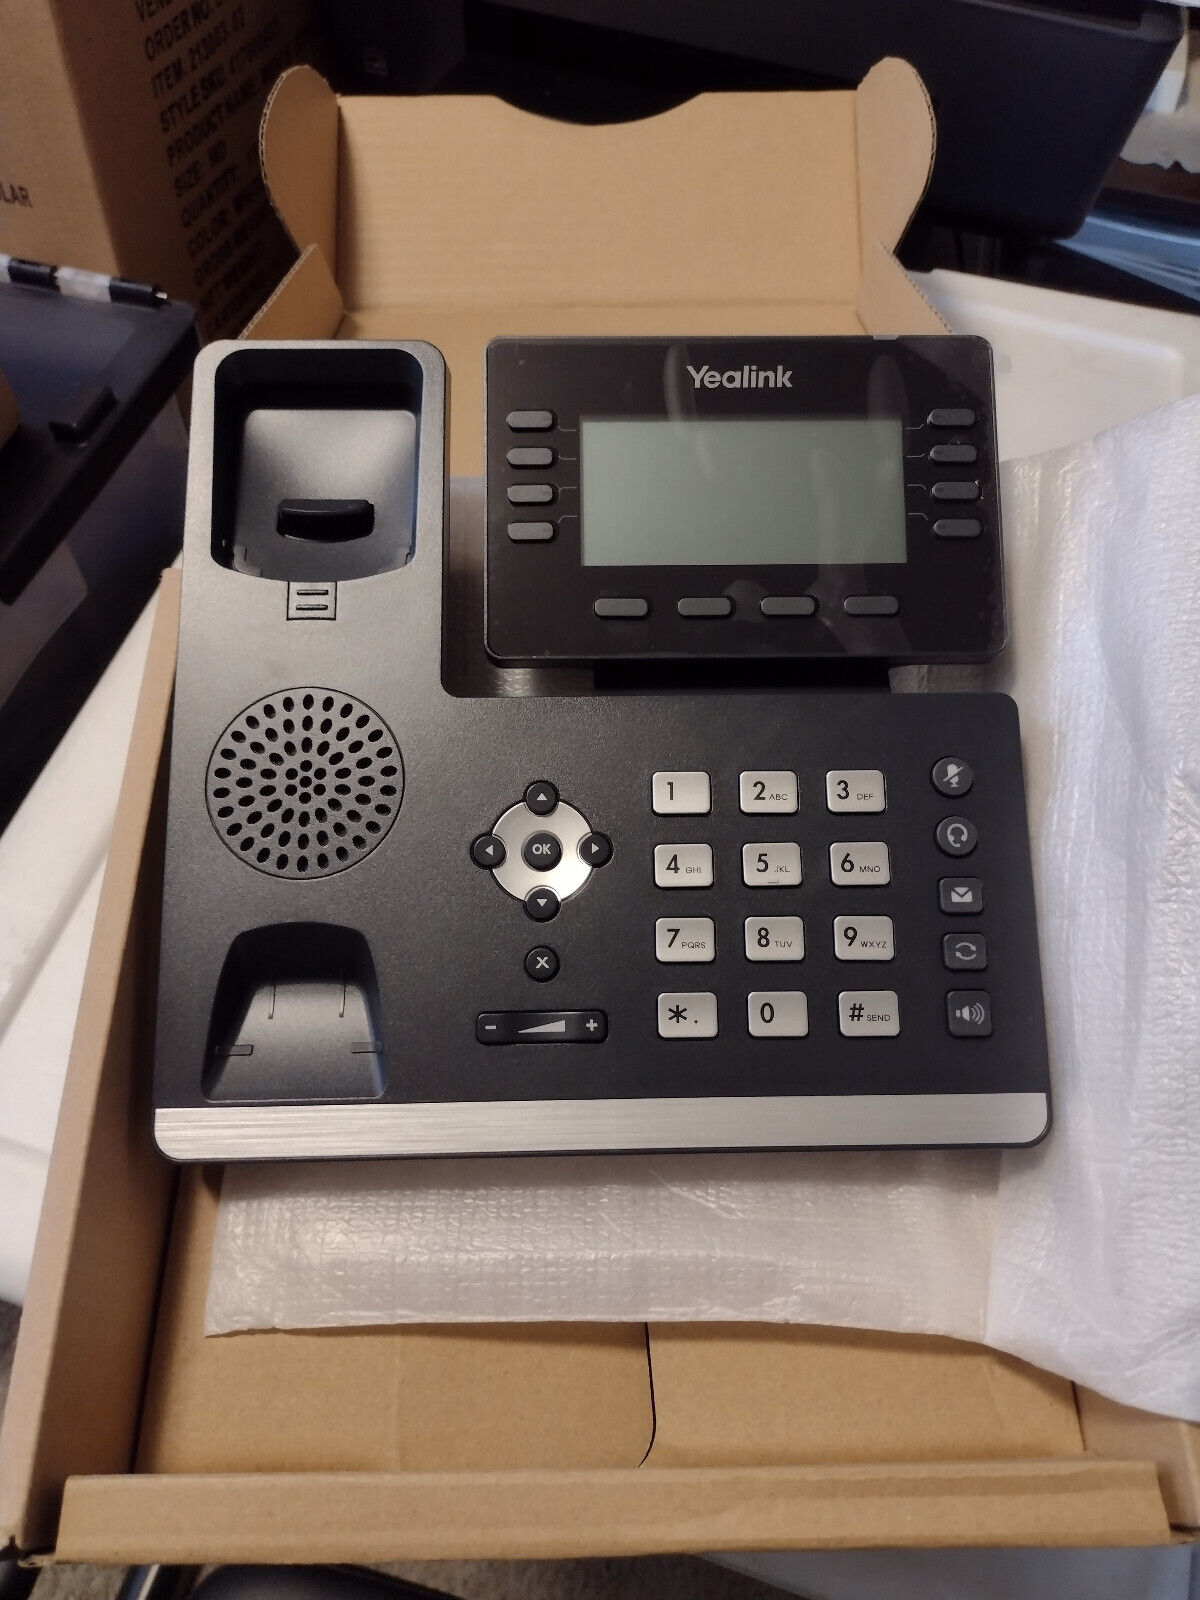 Yealink ip phone set includes Prime Business Phone SIP-T53W, 4 Classic SIP-T31P